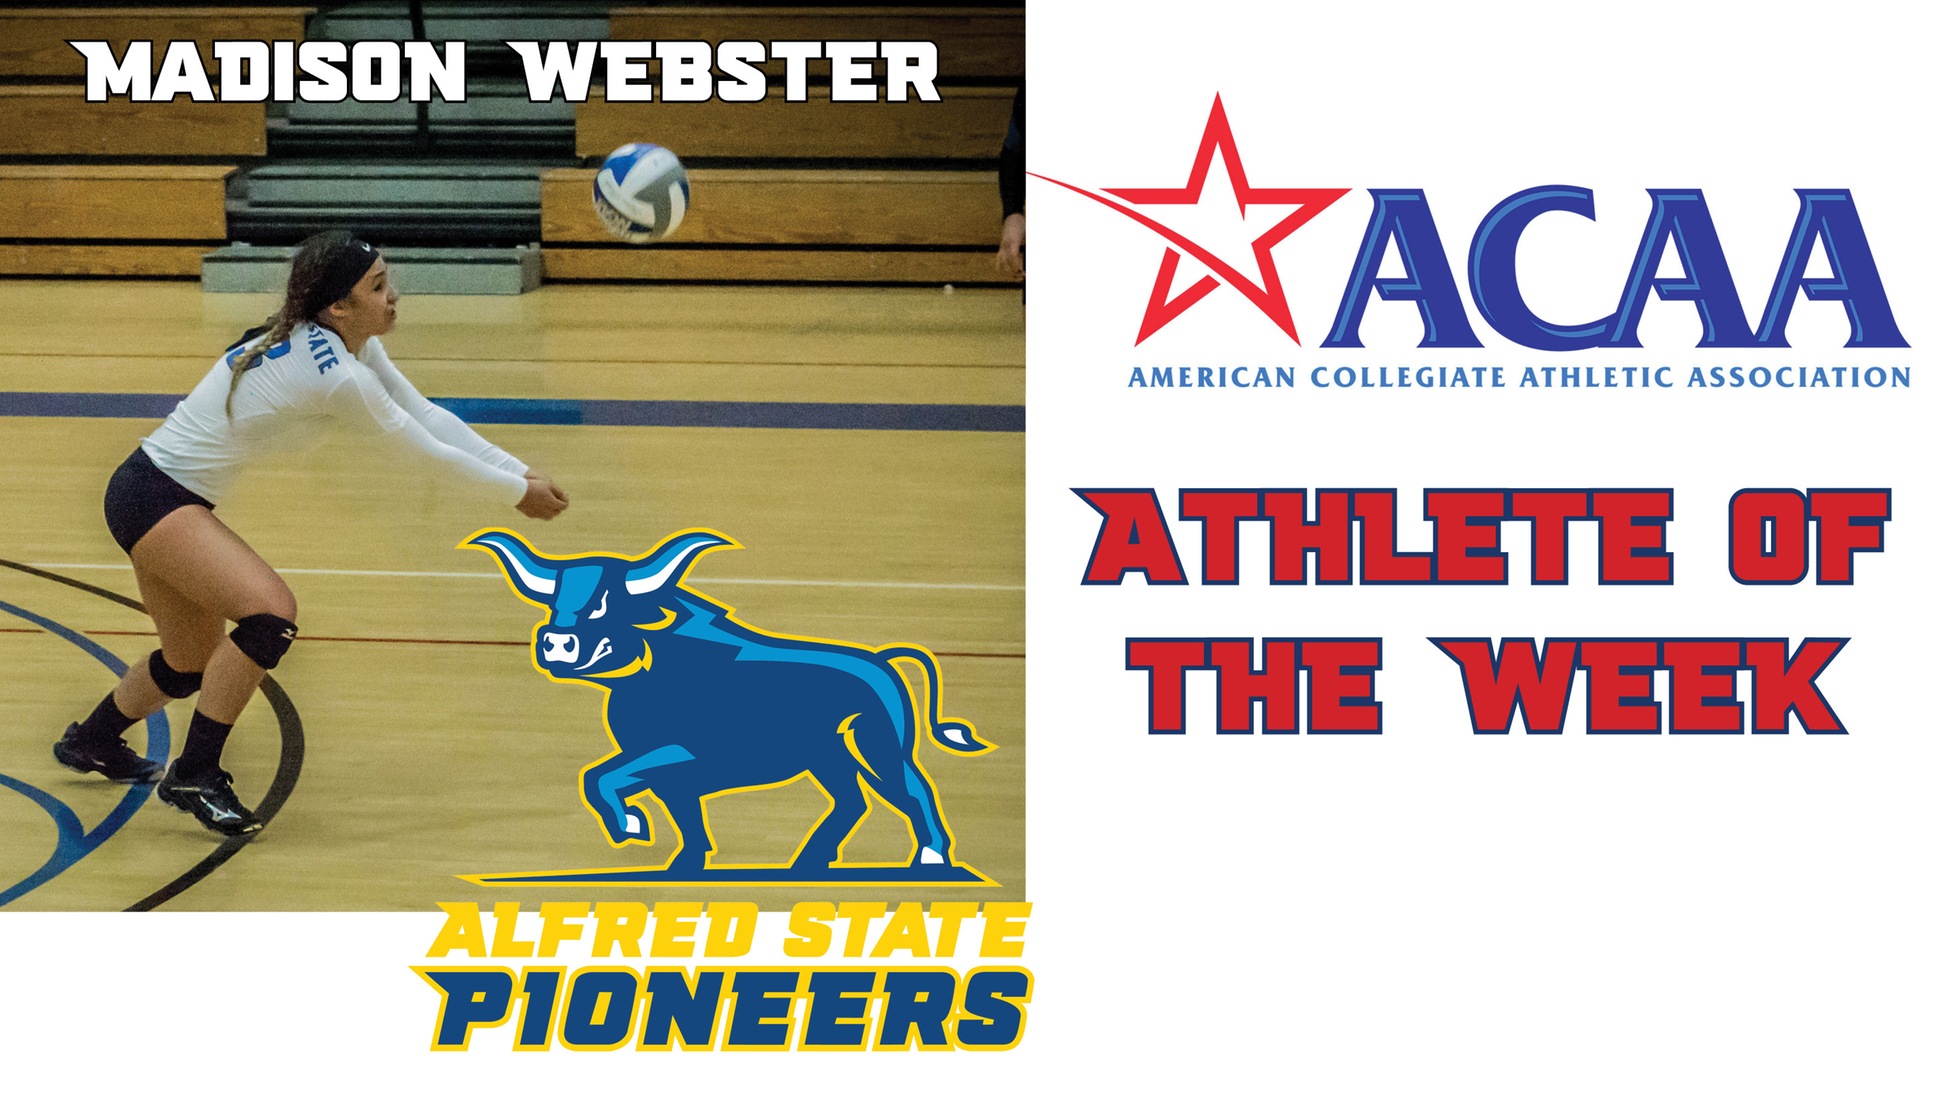 Madison Webster named ACAA Player of the Week